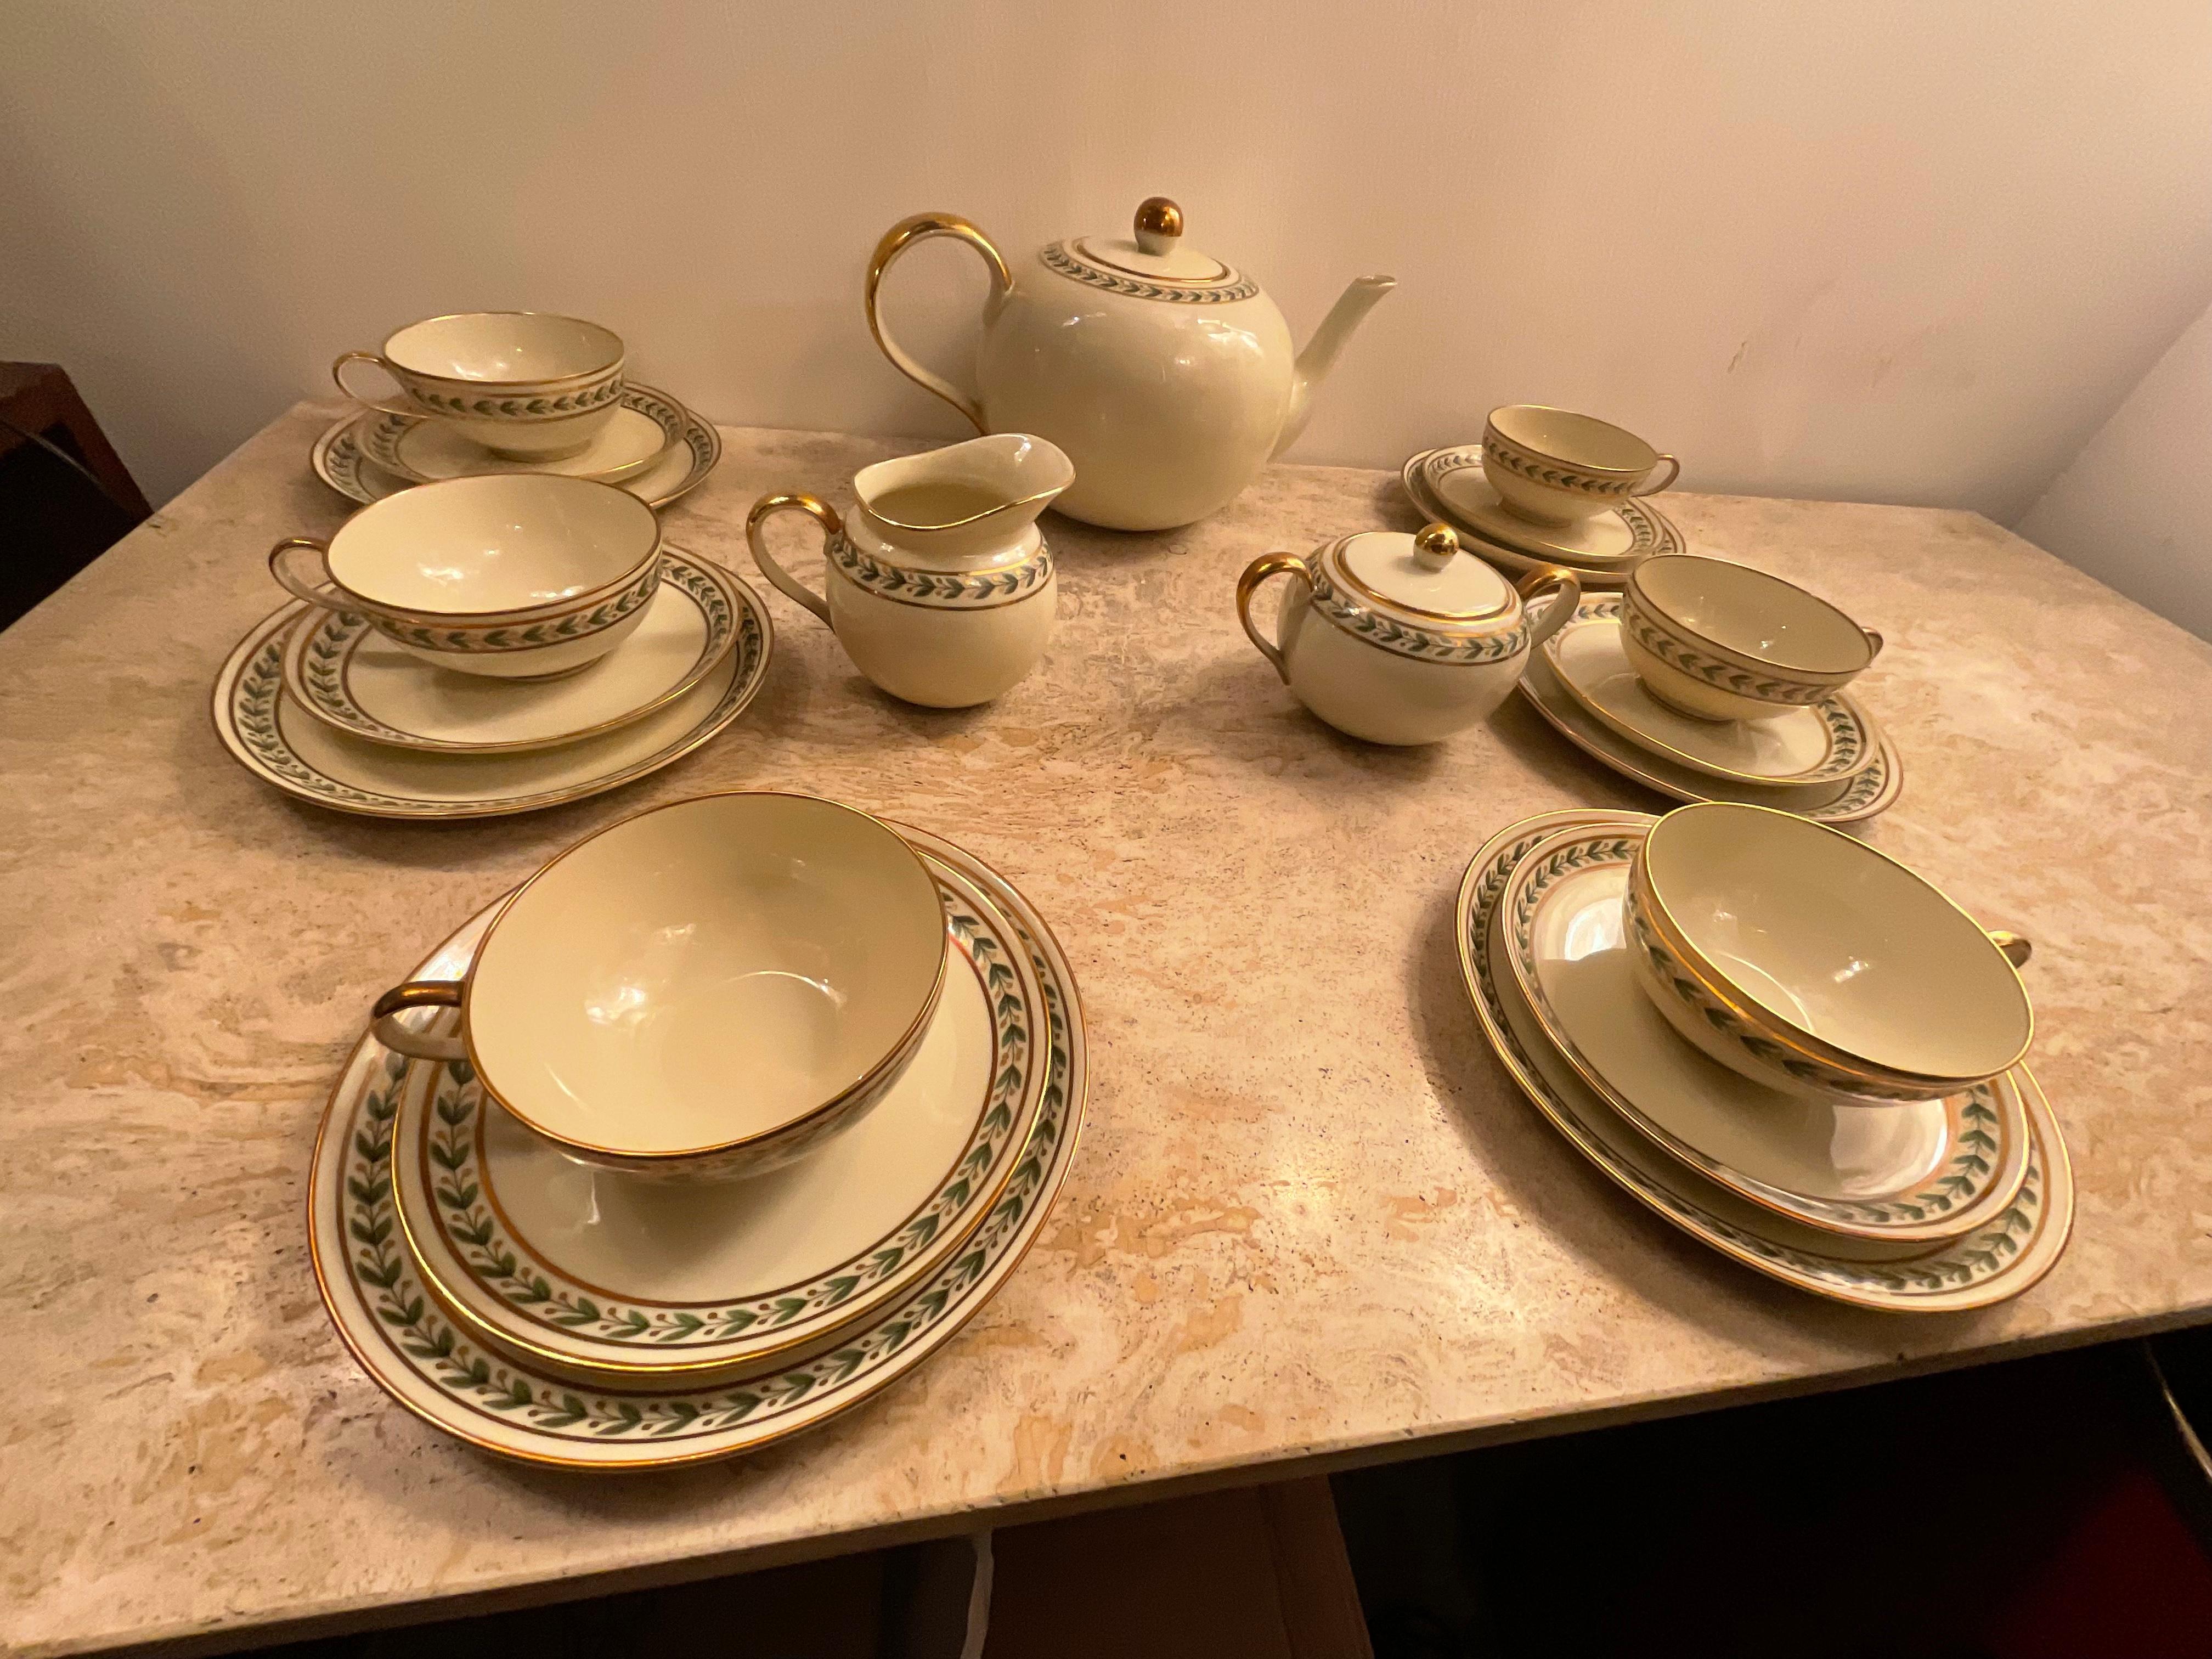 Gio Ponti, Tea for 6 with Dessert Plates, in Porcelain Richard Ginori, Year 1939 For Sale 3